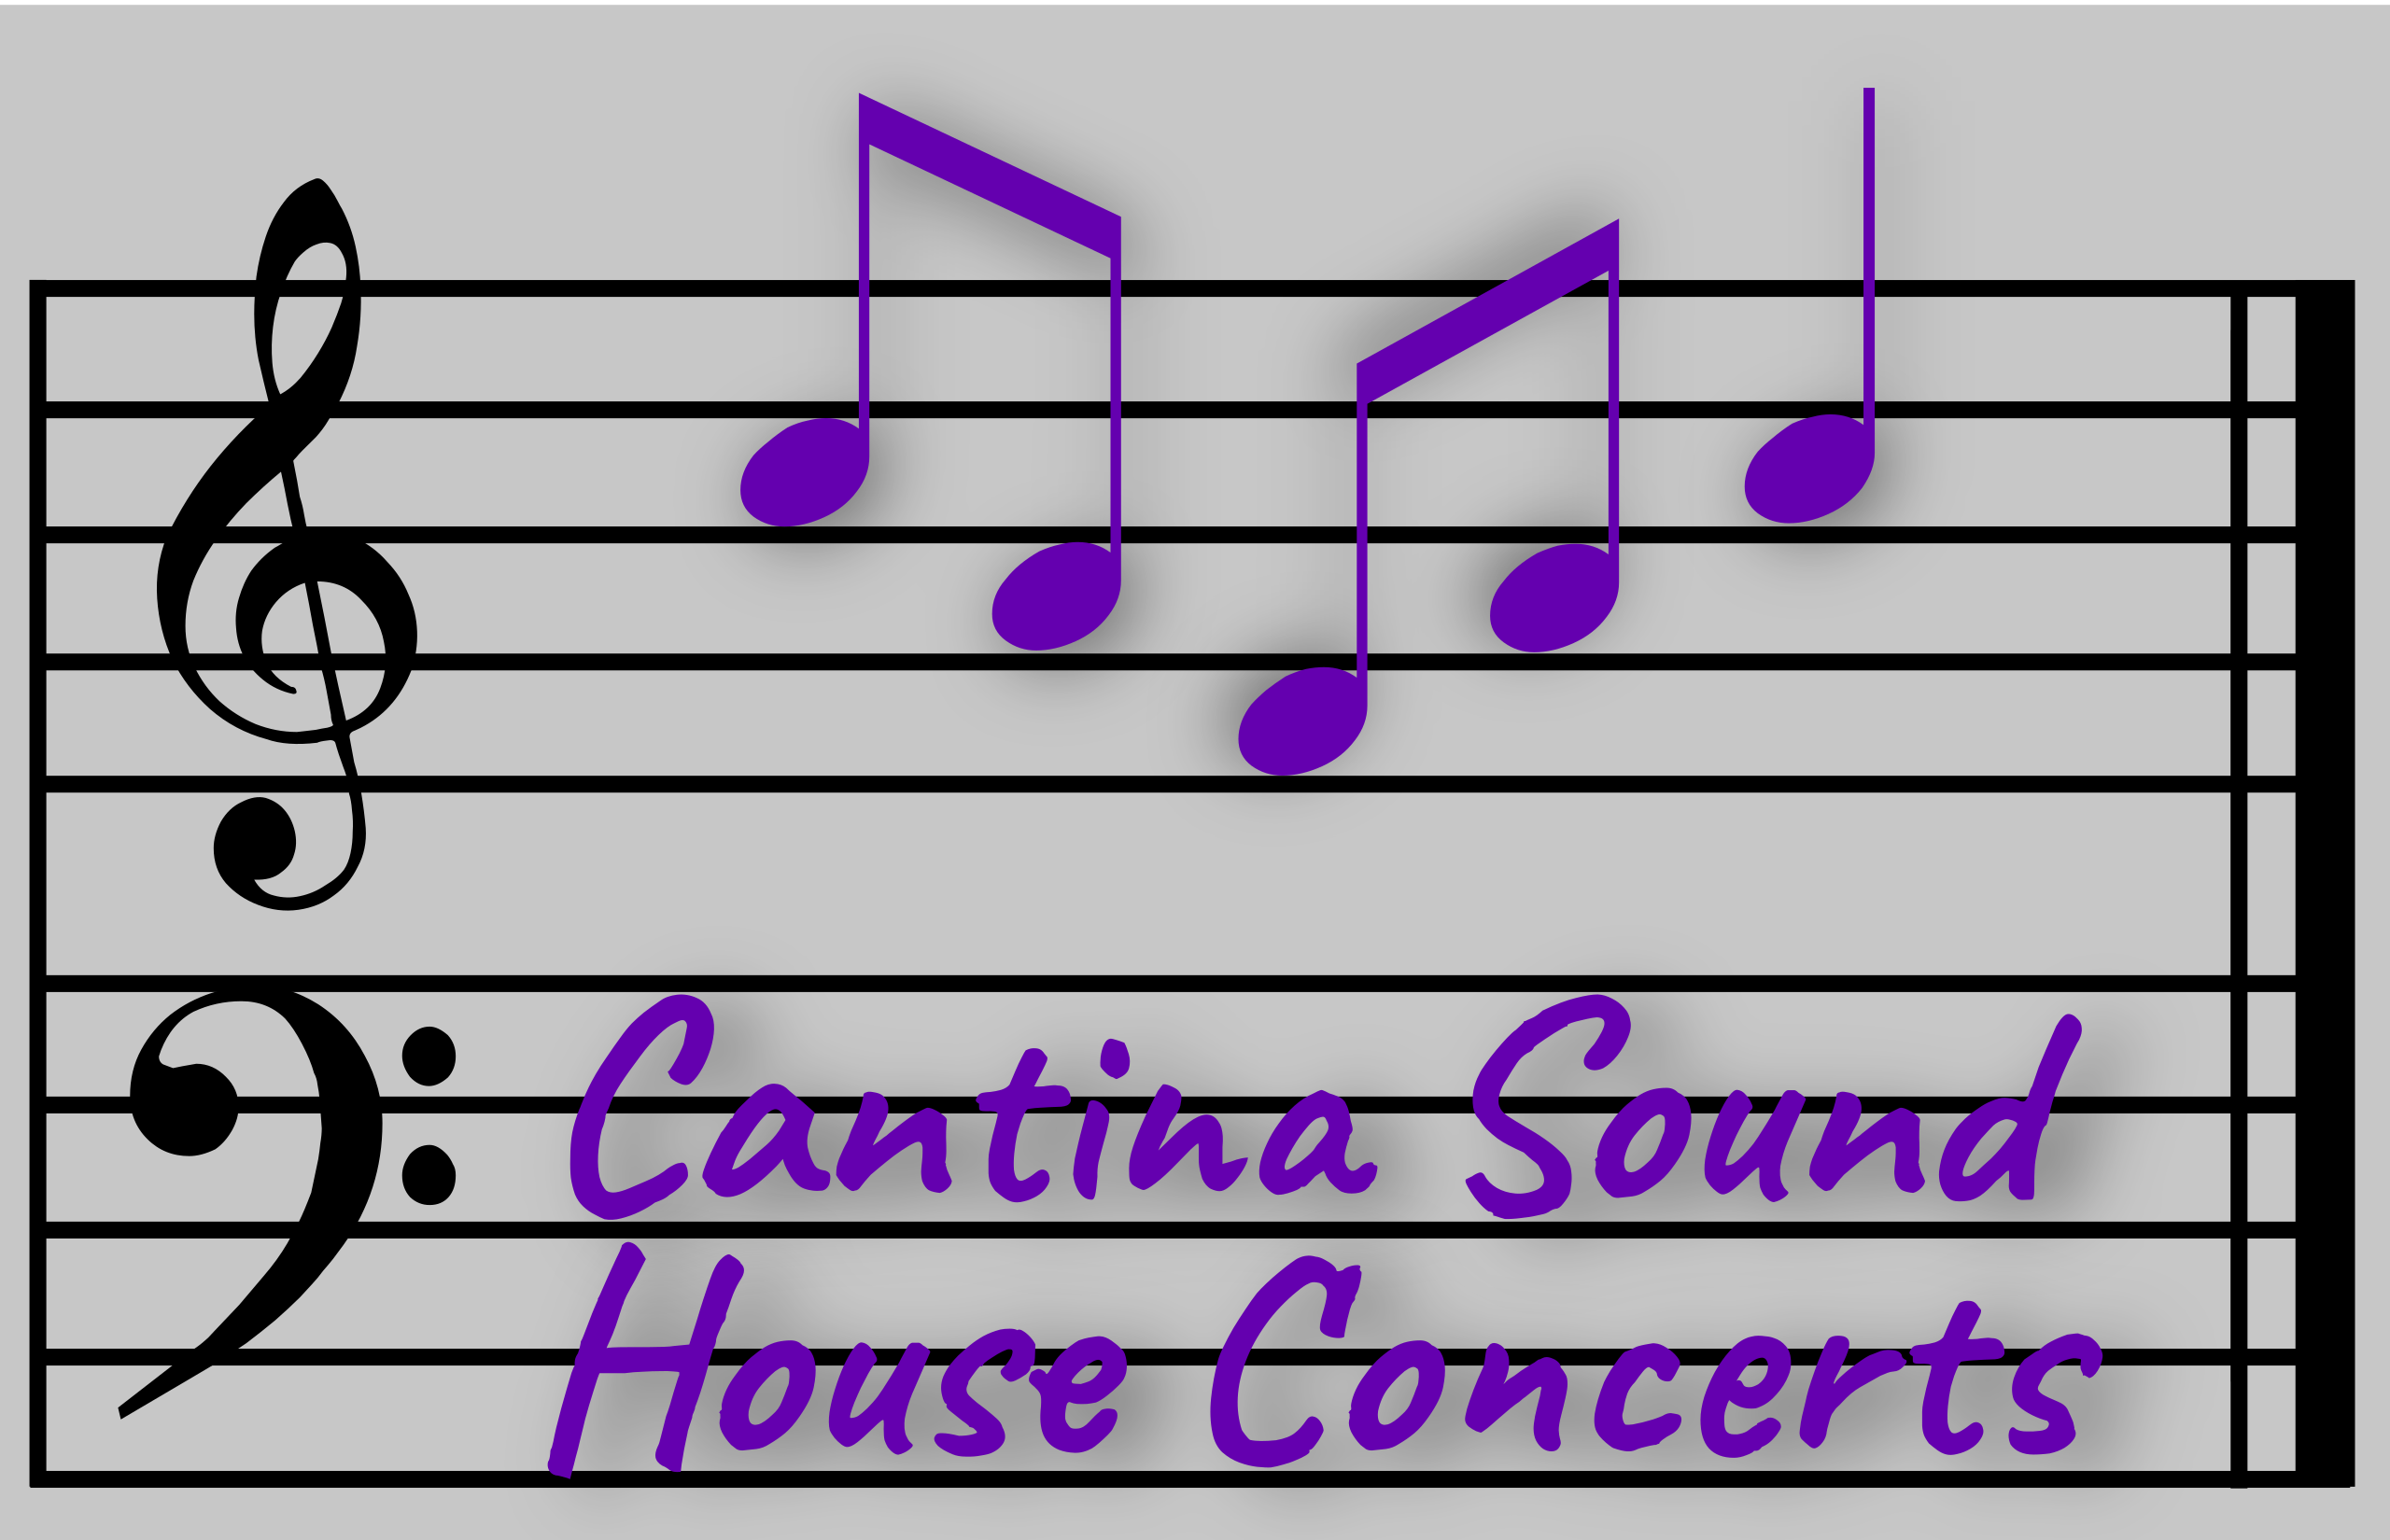 Cantina Sound House Concerts